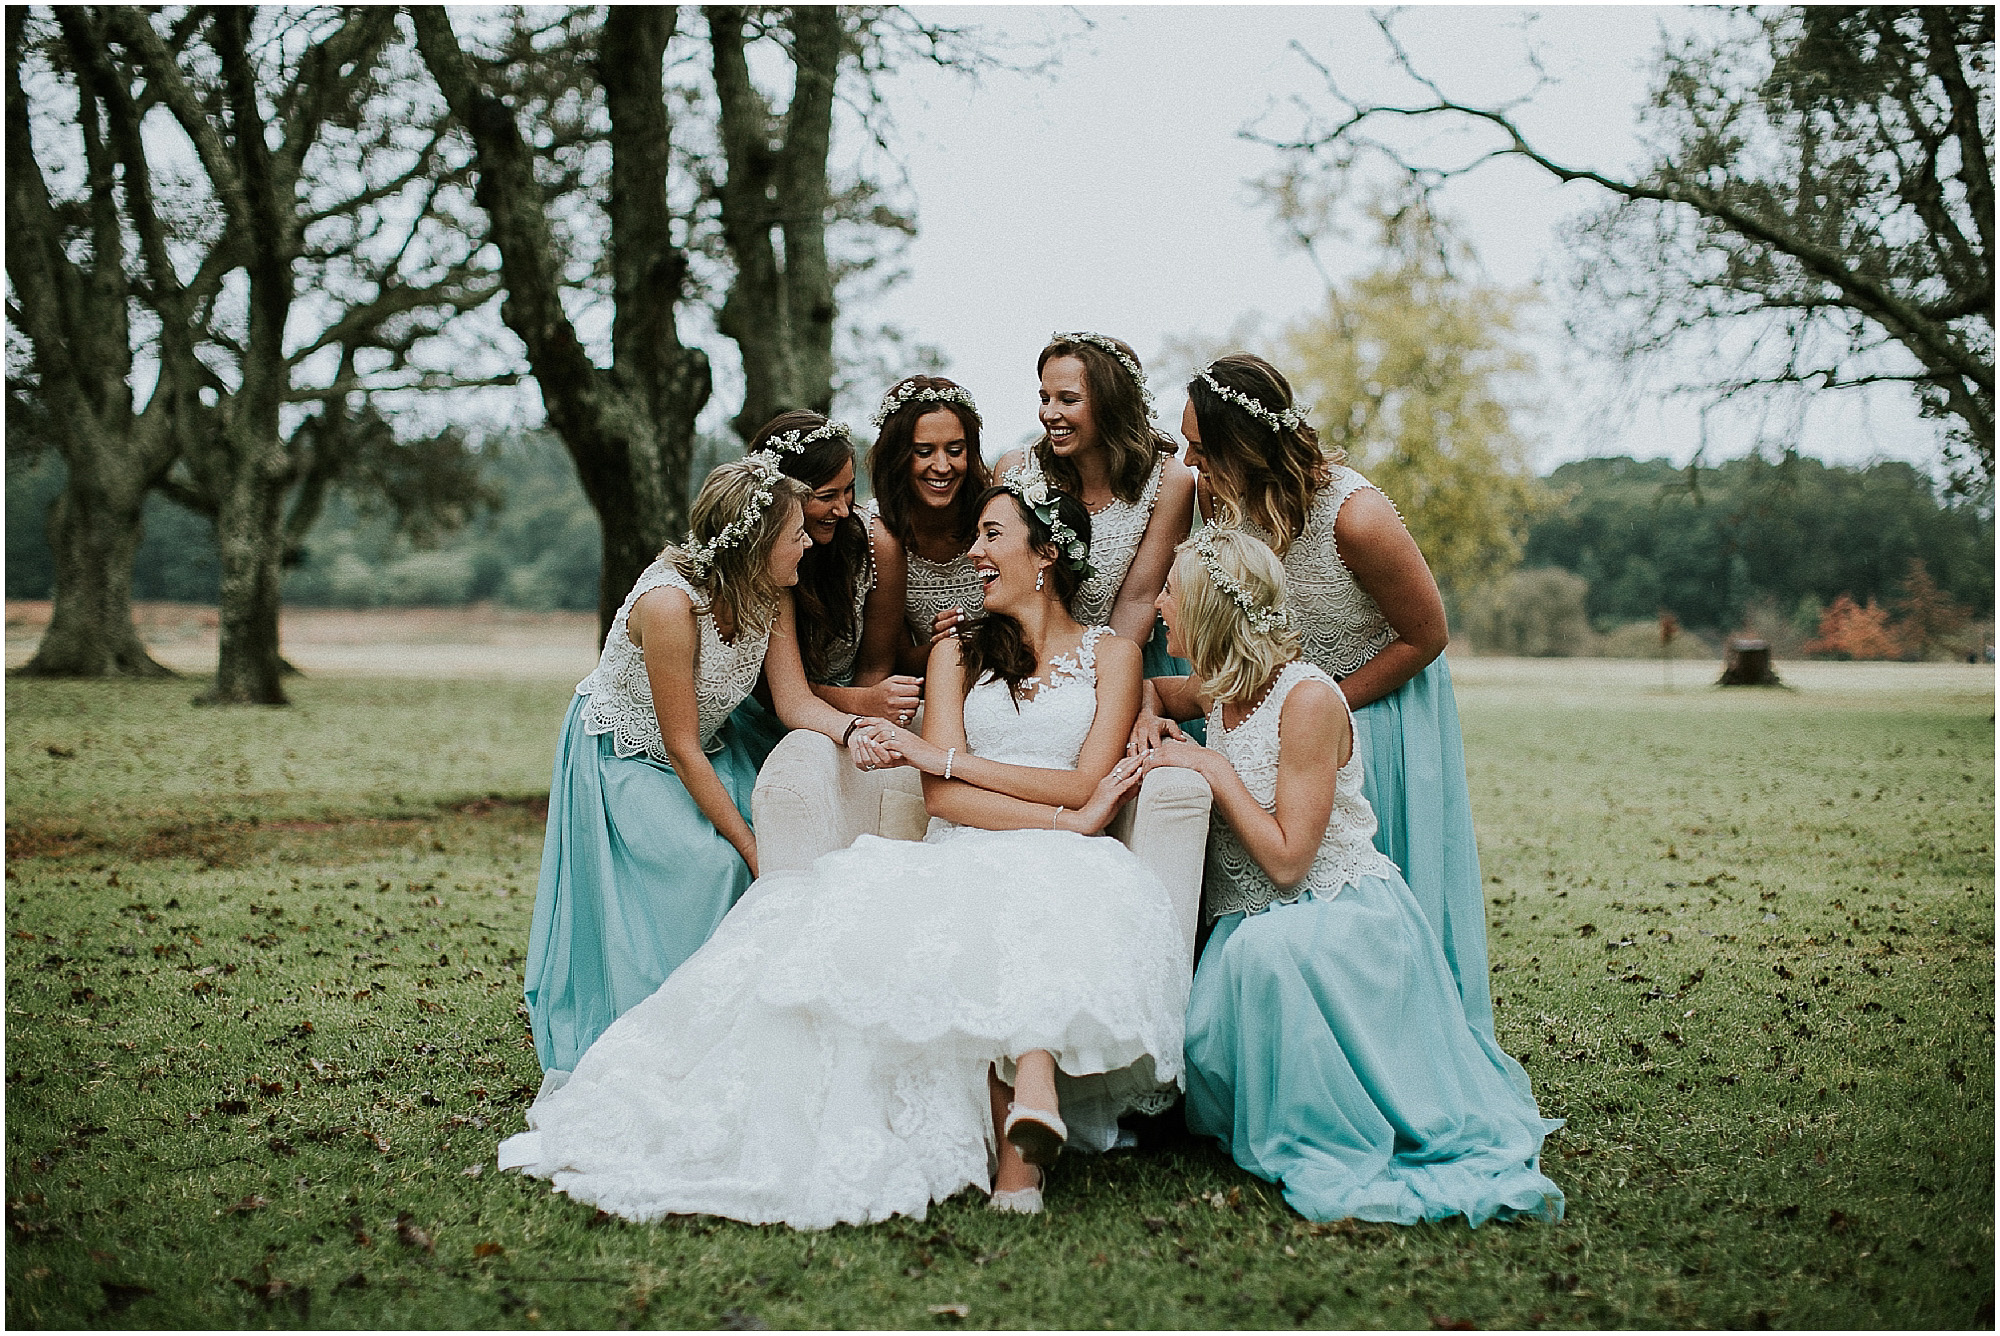 Outdoor-Forest-Destination-Wedding-Photographer-Maryke-Albertyn-Photography-Looks-Like-Film-Authentic-Alternative-Cape-Town-Pretoria-Silver-Sixpence-Dullstroom-Bridesmaids-Flower-Crown